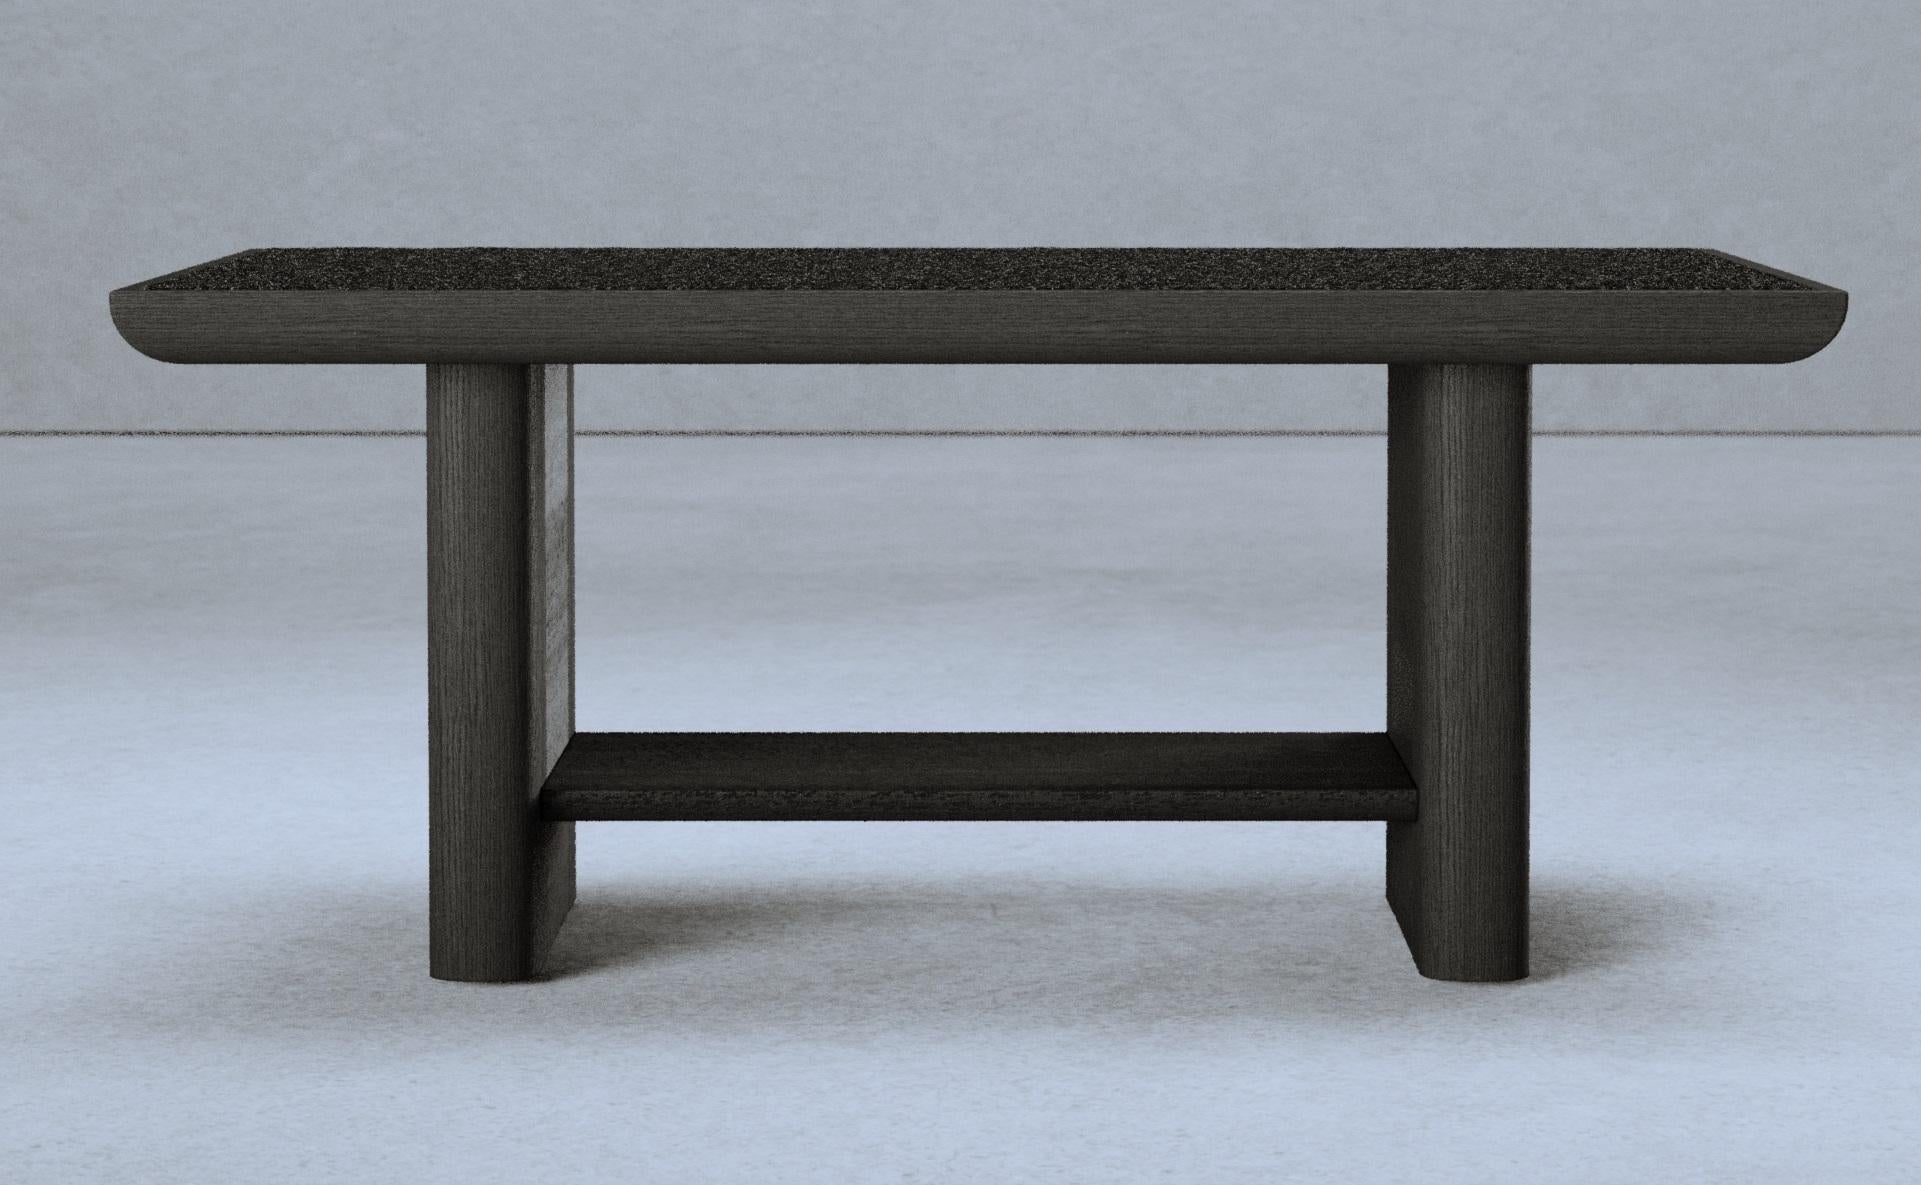 Vittorio Side Table by Gio Pagani
Dimensions: D 55 x W 90 x H 38.5 cm.
Materials: Black ash wood and Loro Piana wool.

In a fluid society capable of mixing infinite social and cultural varieties, the nostalgic search for reworked aesthetics that